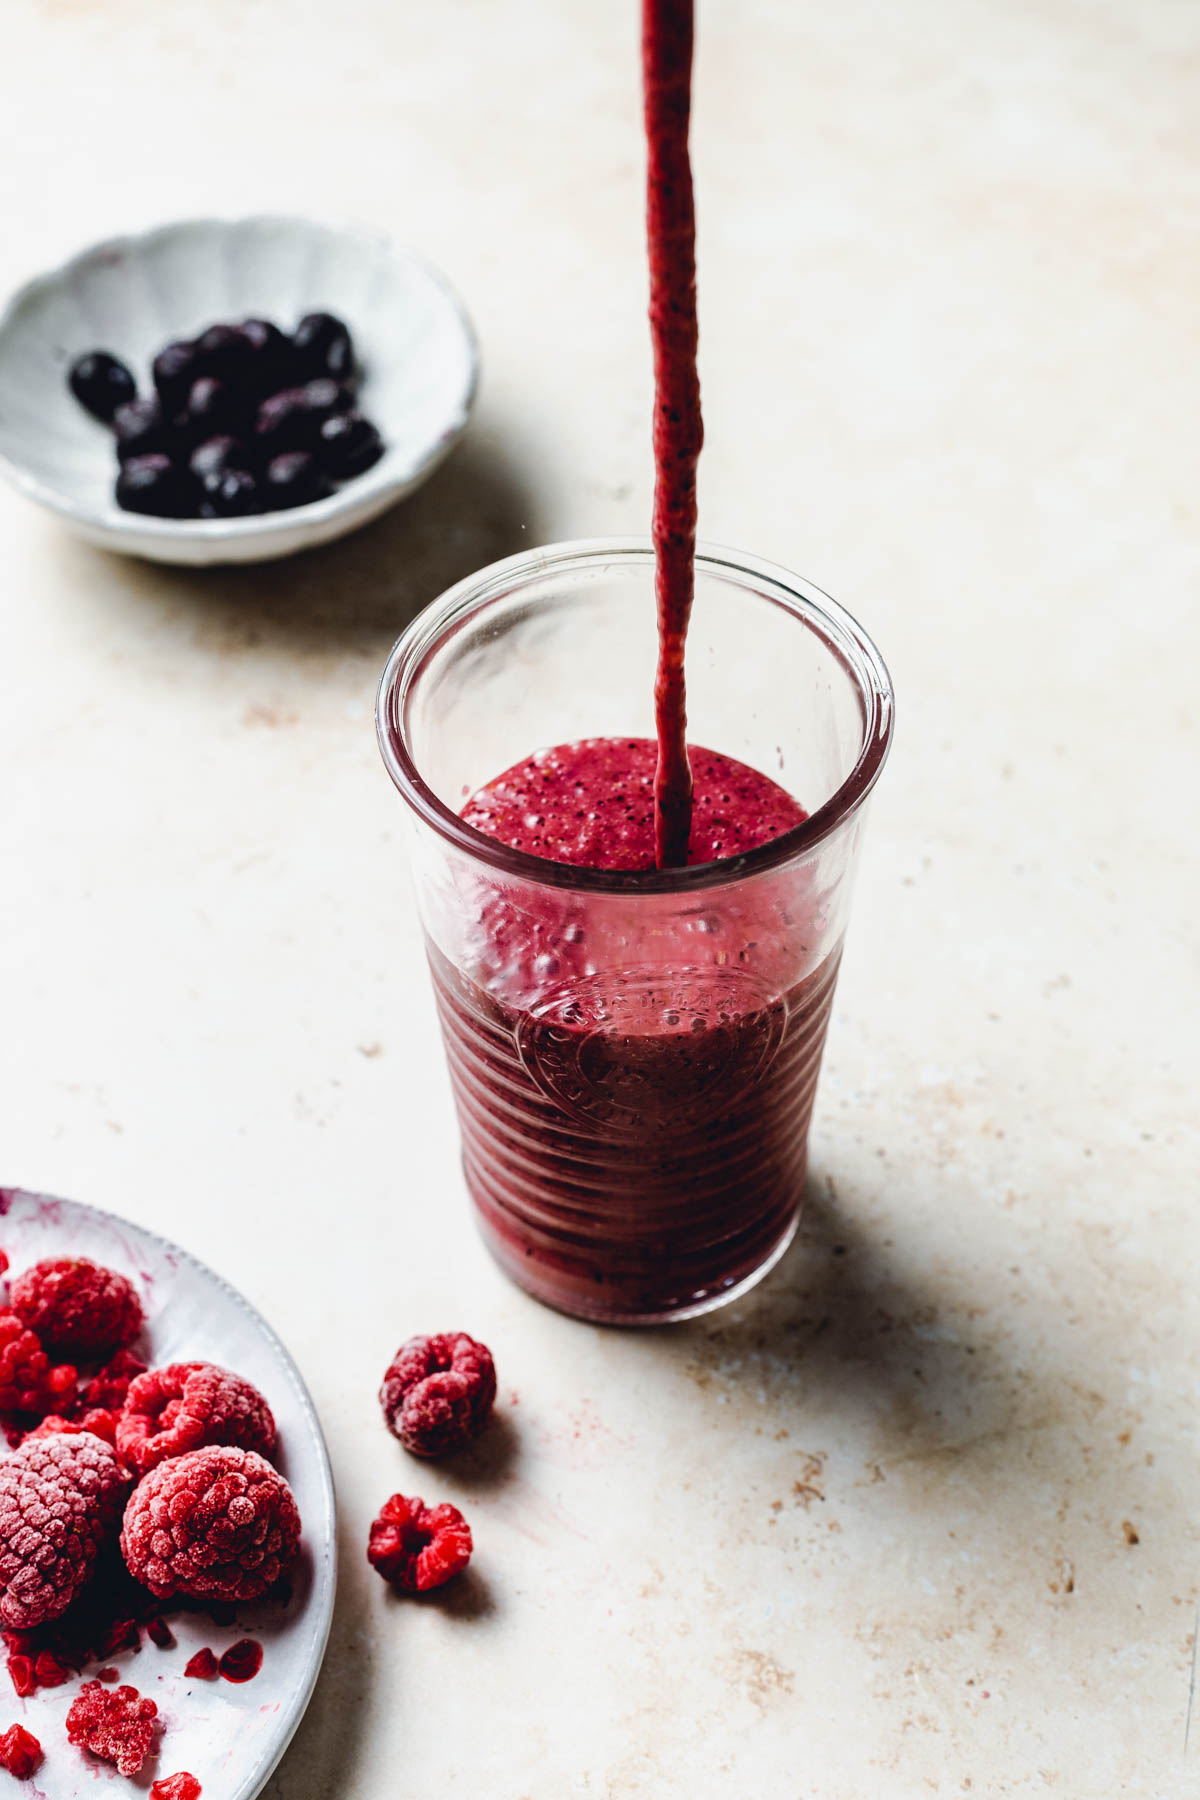 A side view of deep red smoothie being poured into a ribbed glass.